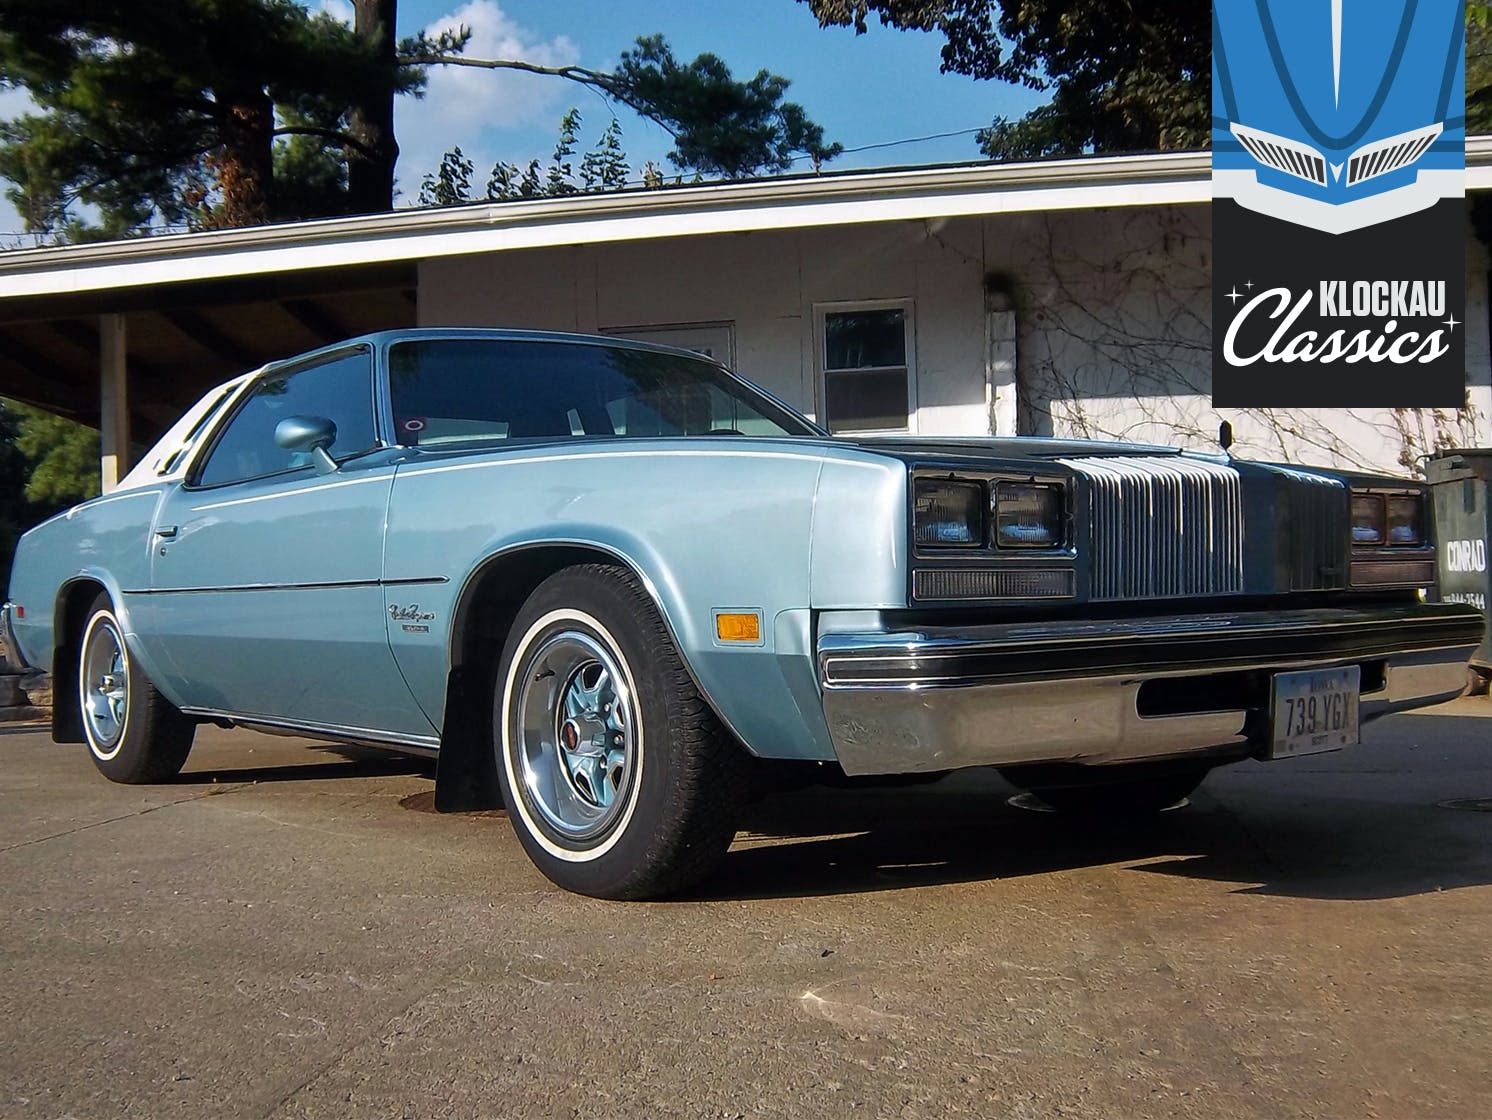 The 1977 Oldsmobile Cutlass Supreme Brougham is one classy Colonnade Coupe  - Hagerty Media